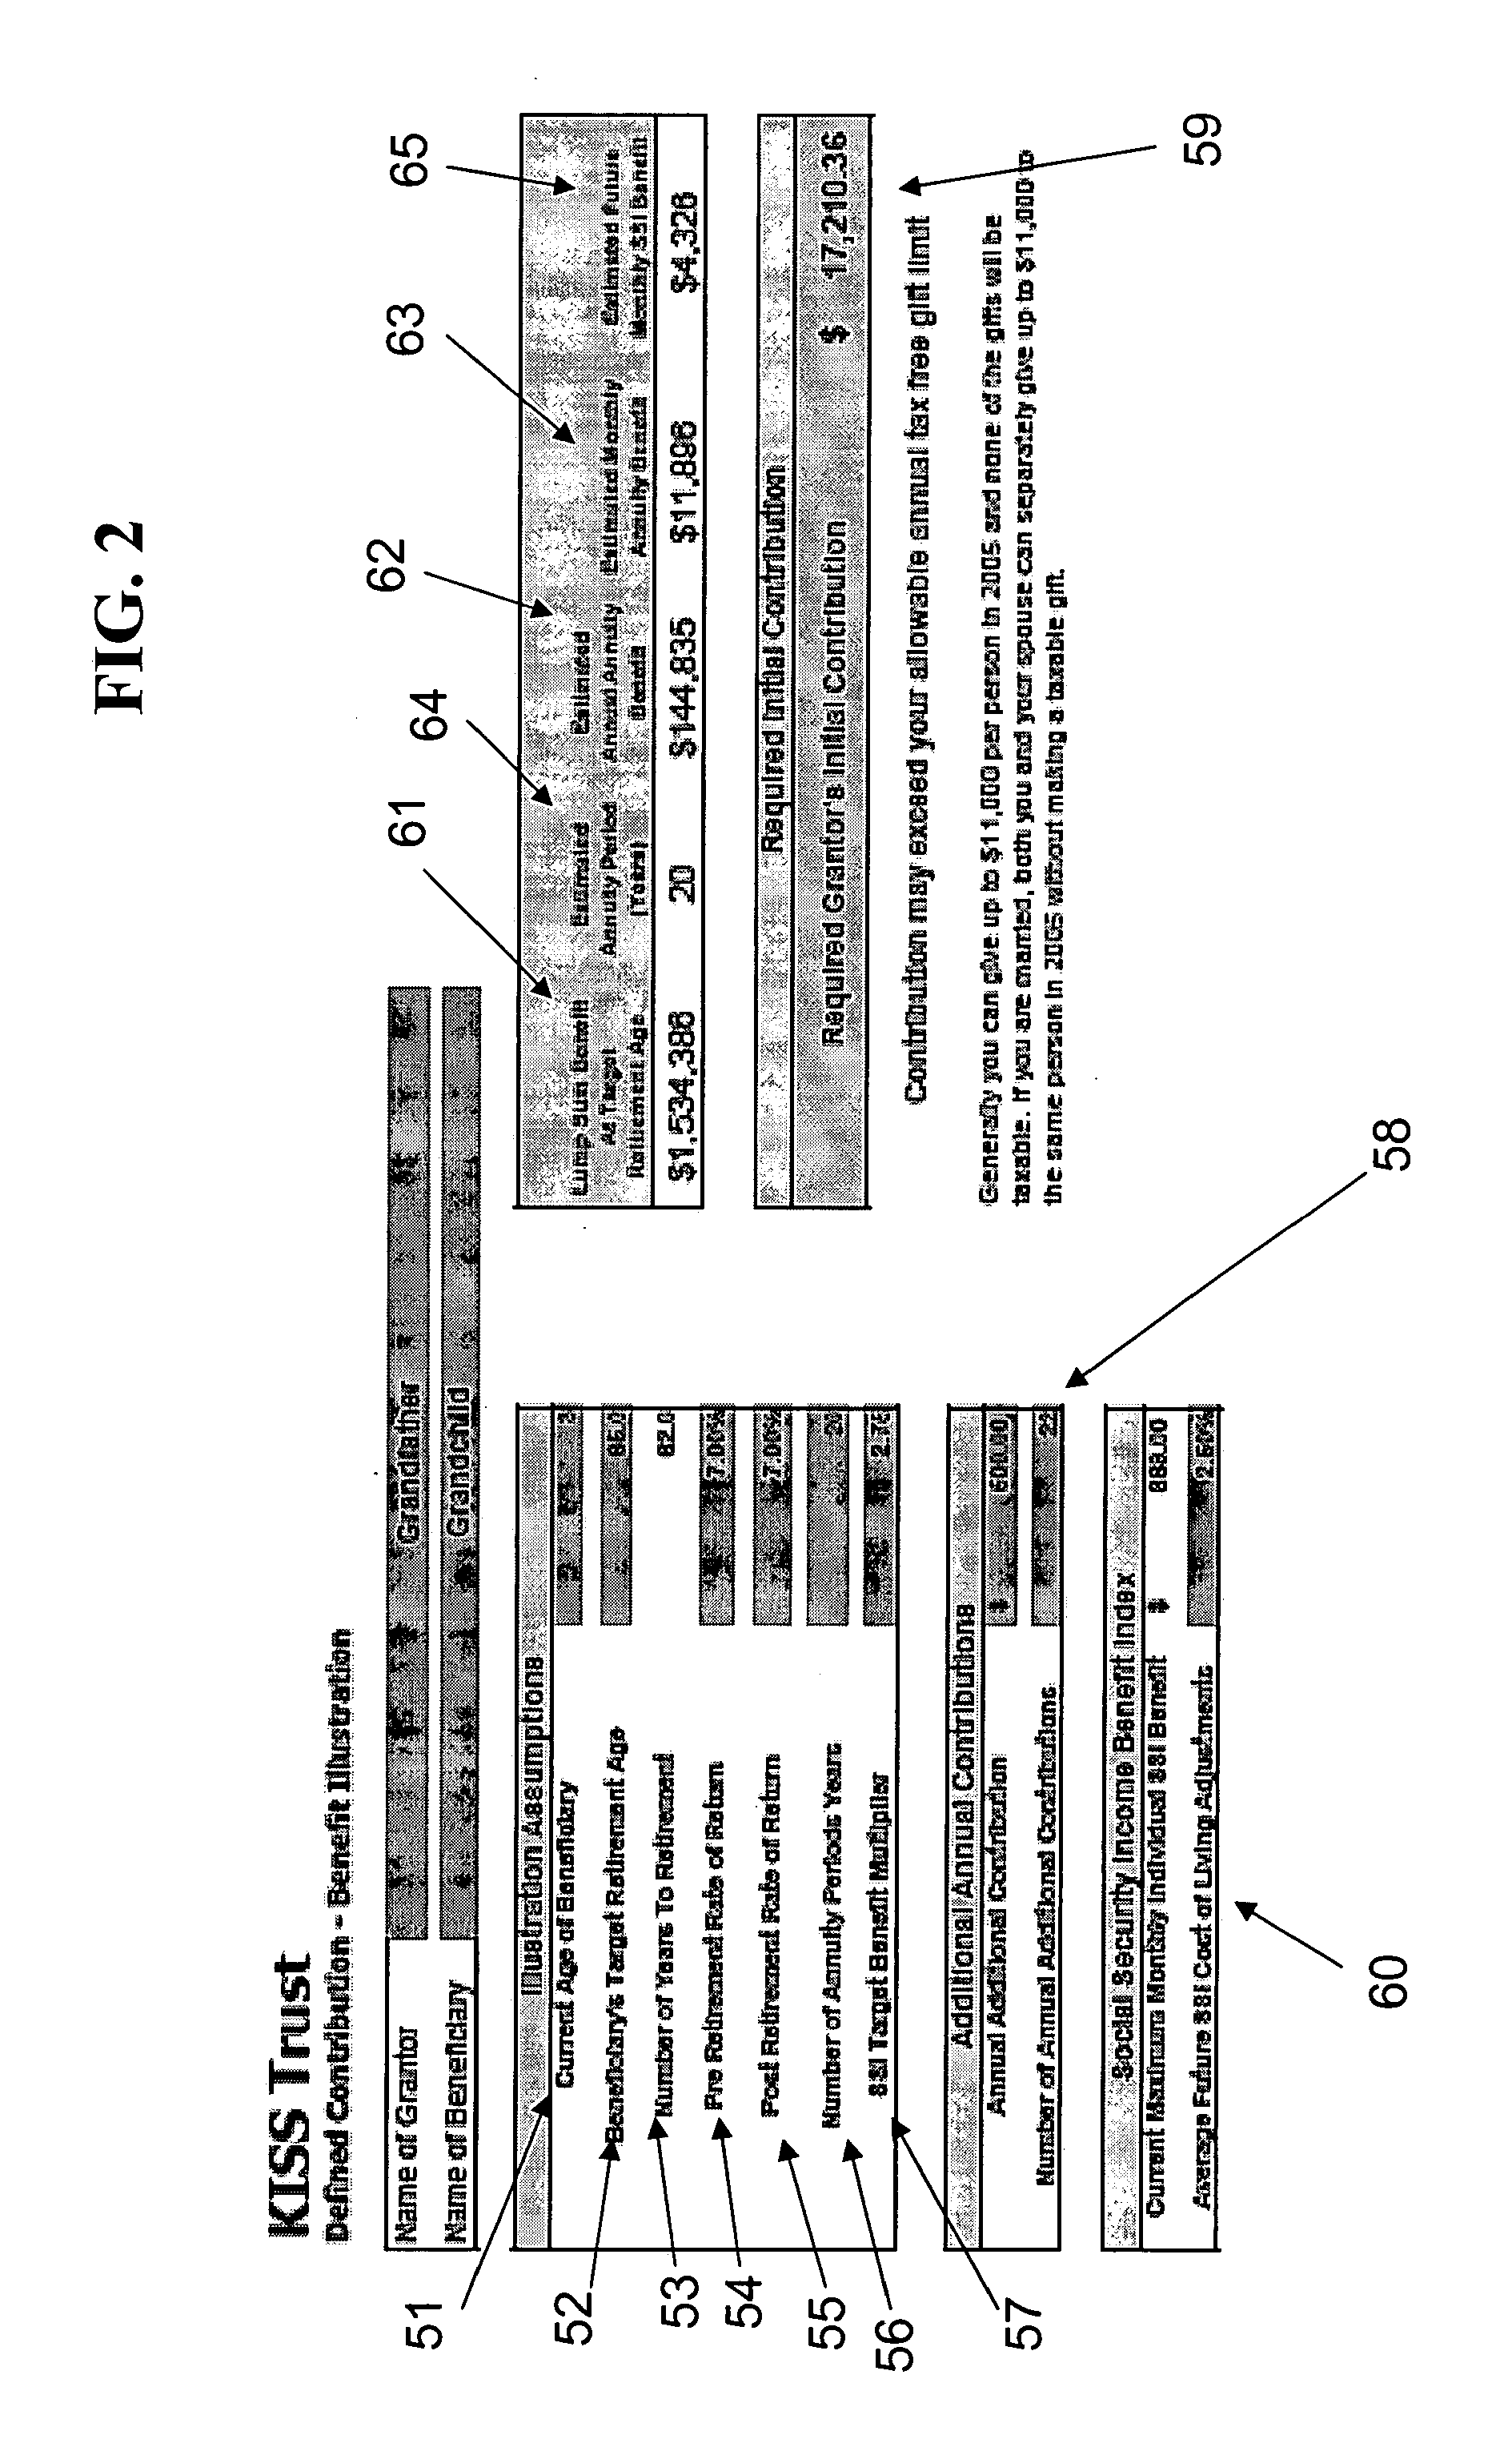 System and Method for Facilitating the Funding and Administration of a Long Term Investment or Retirement Trust